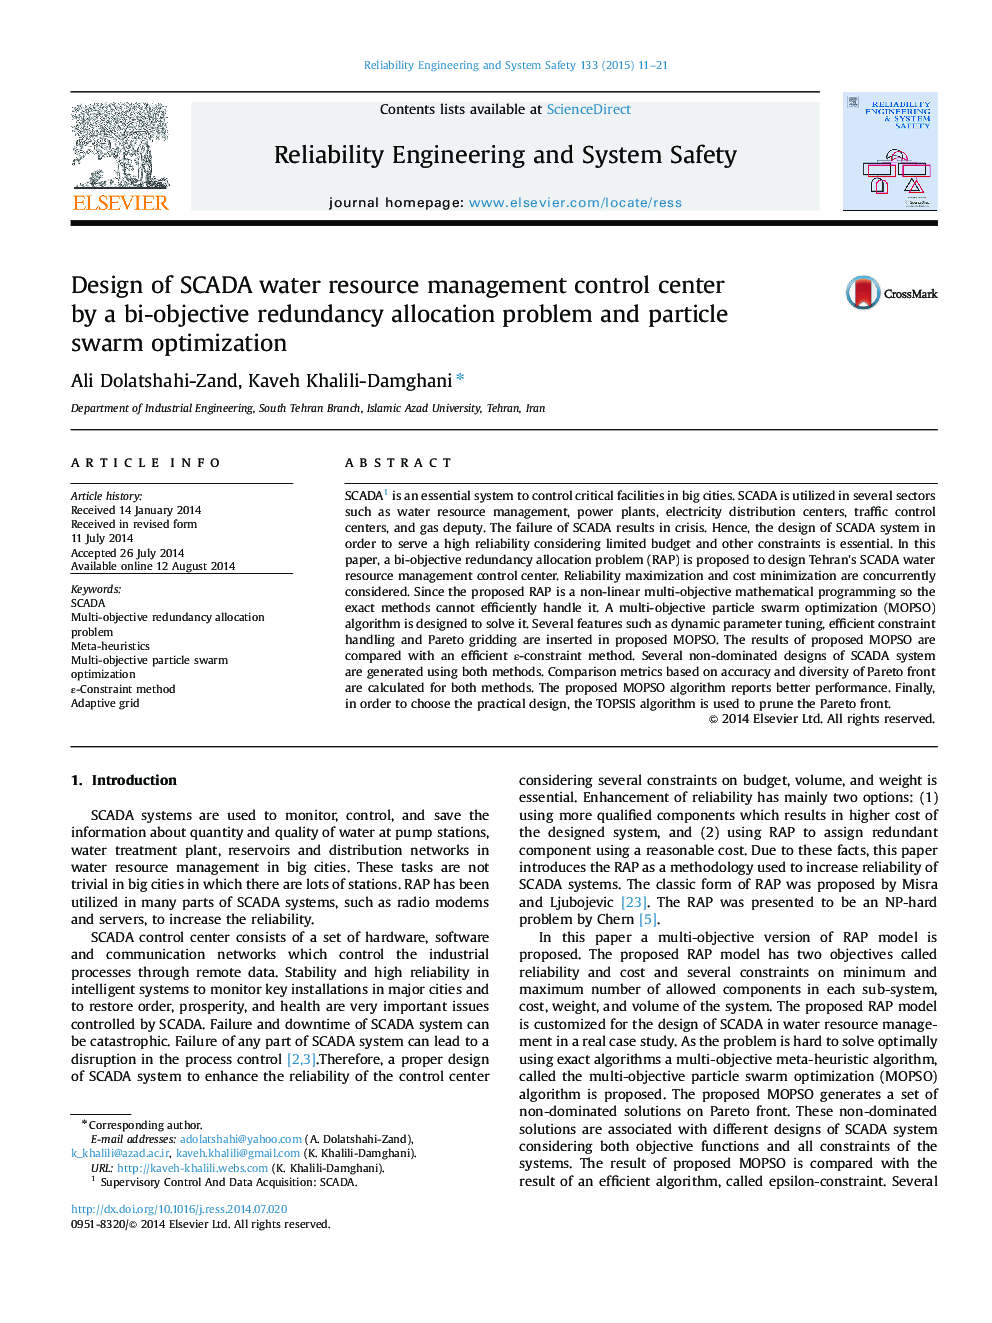 Design of SCADA water resource management control center by a bi-objective redundancy allocation problem and particle swarm optimization